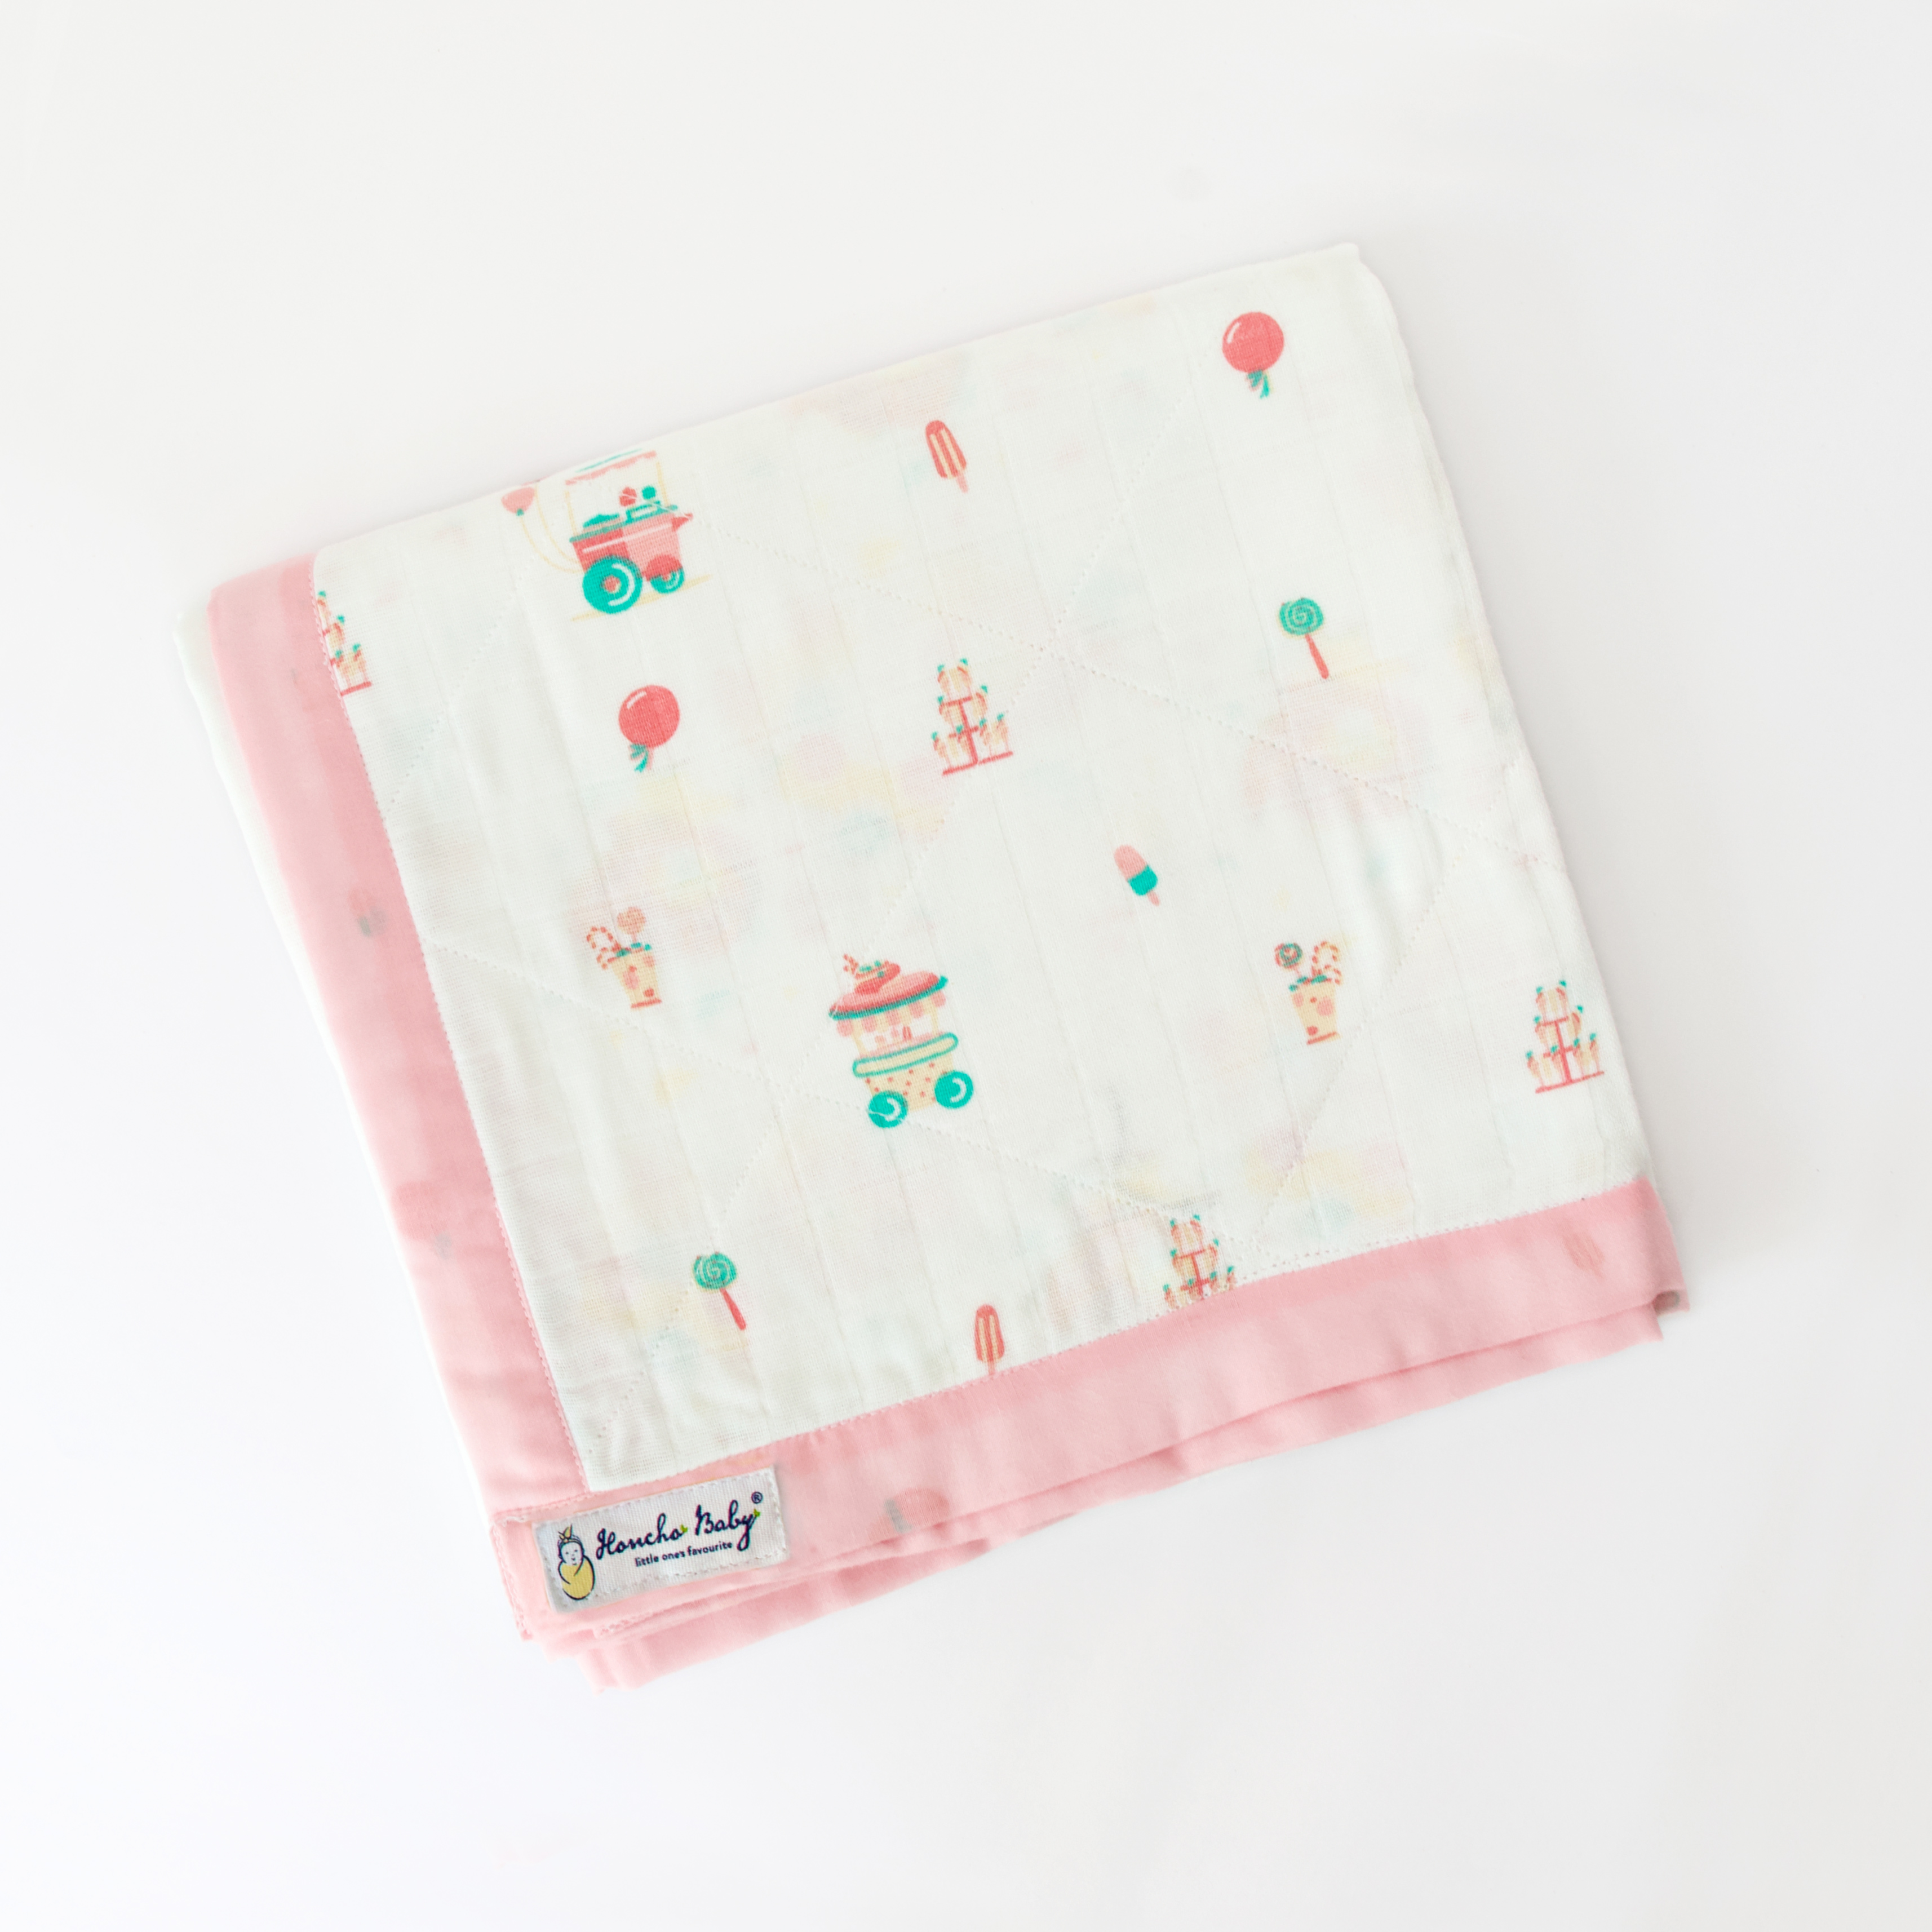 Lion and Bird in the wind & I hear the Ice Cream truck! - Reversible Blanket - 4 layered